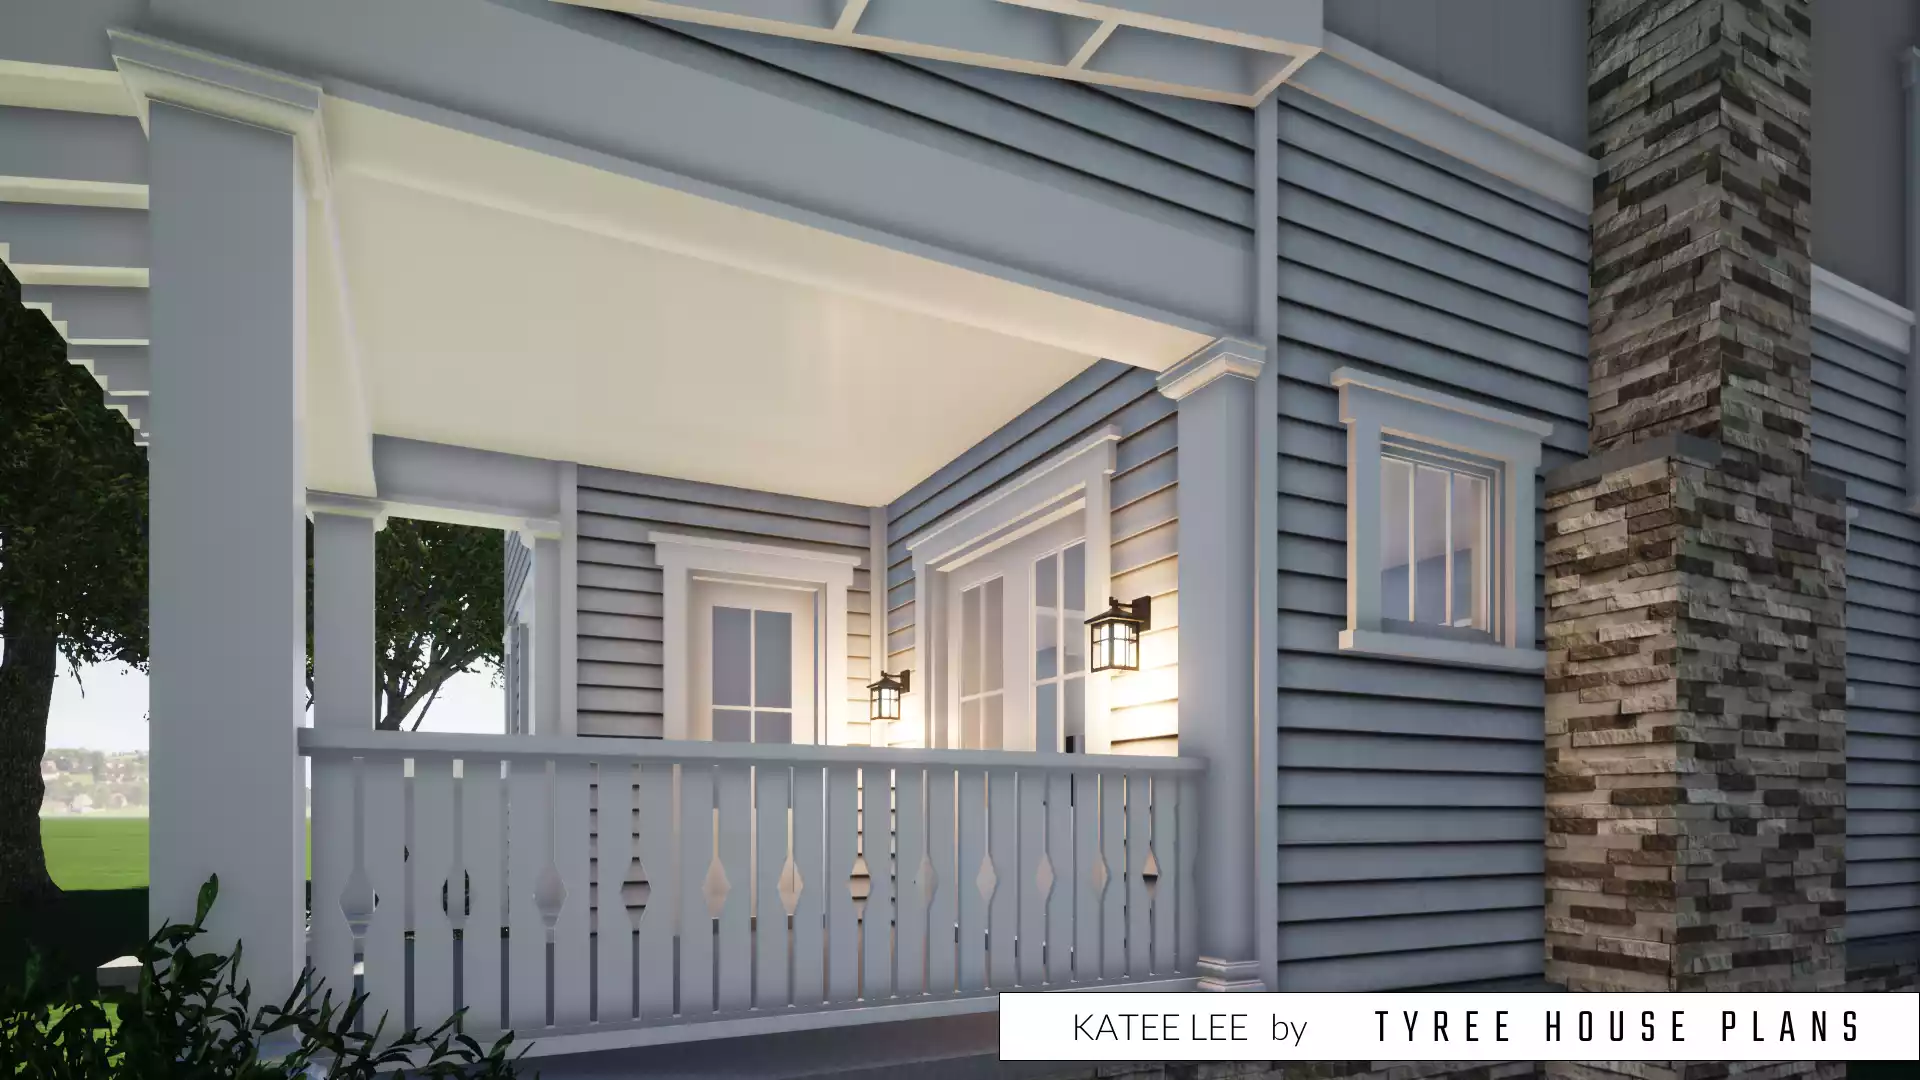 Katee Lee by Tyree House Plans